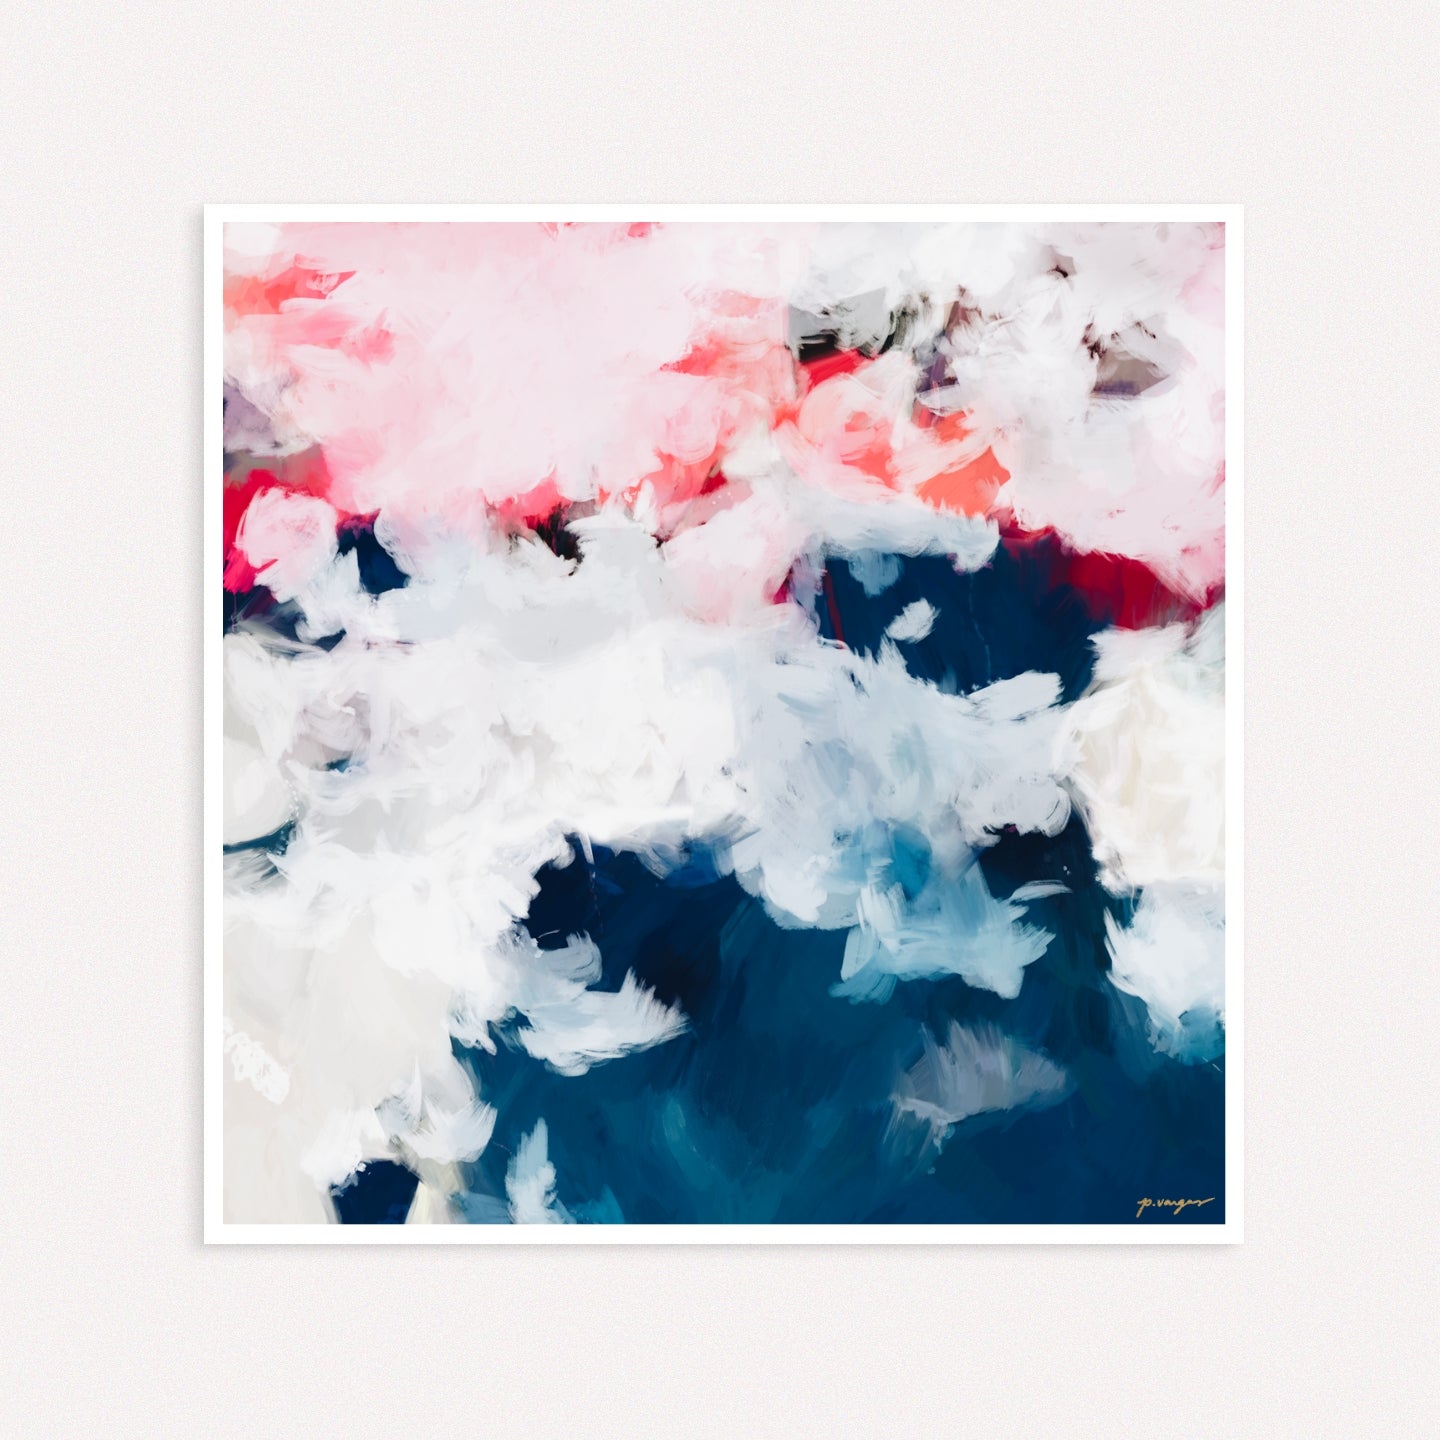 Oceane, blue and pink colorful abstract wall art print by Parima Studio